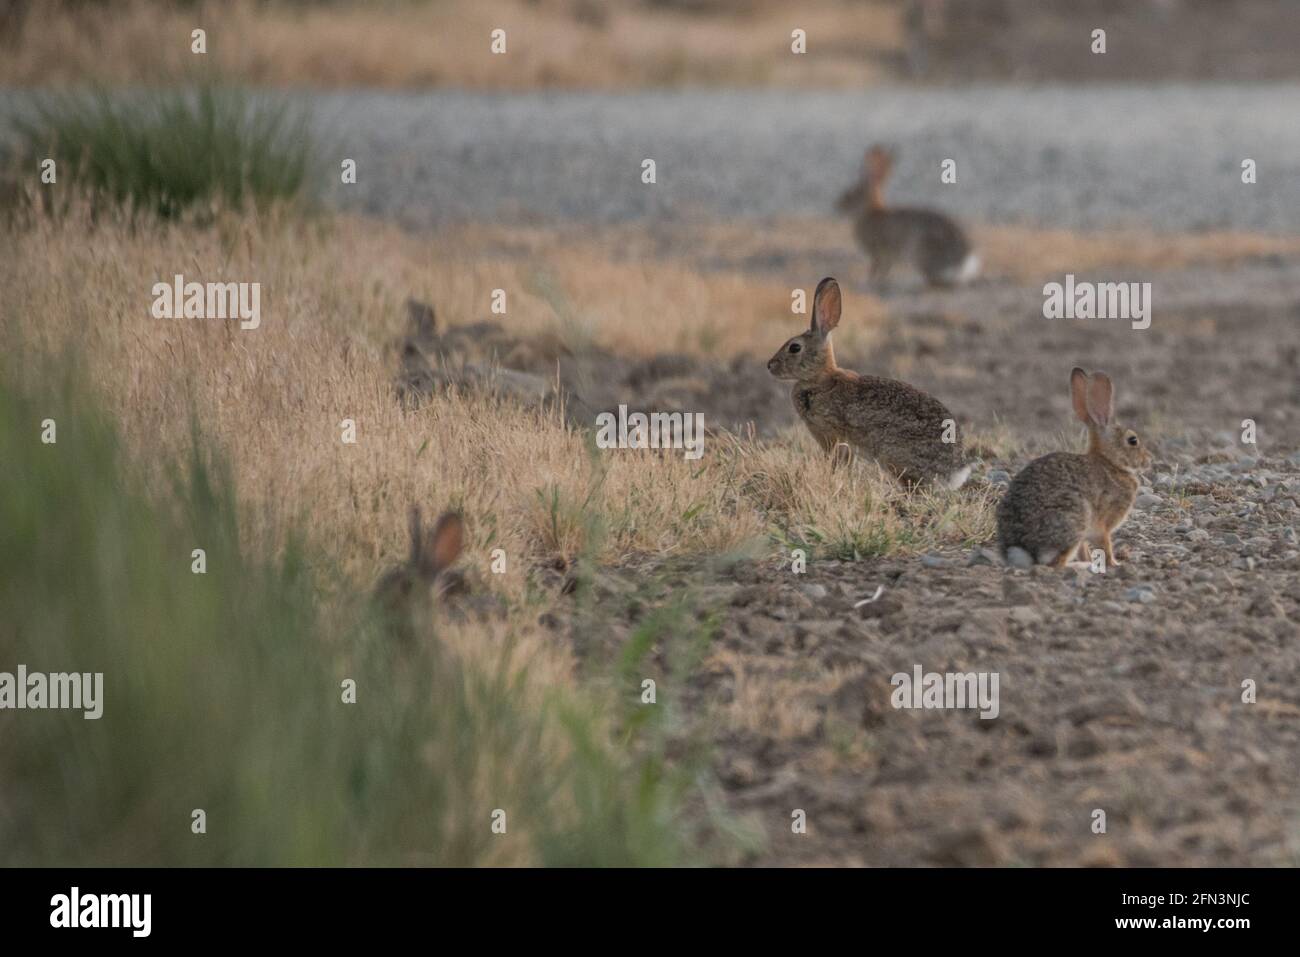 A gathering of desert cottontail rabbits near the warren in San Joaquin valley in central California. Stock Photo